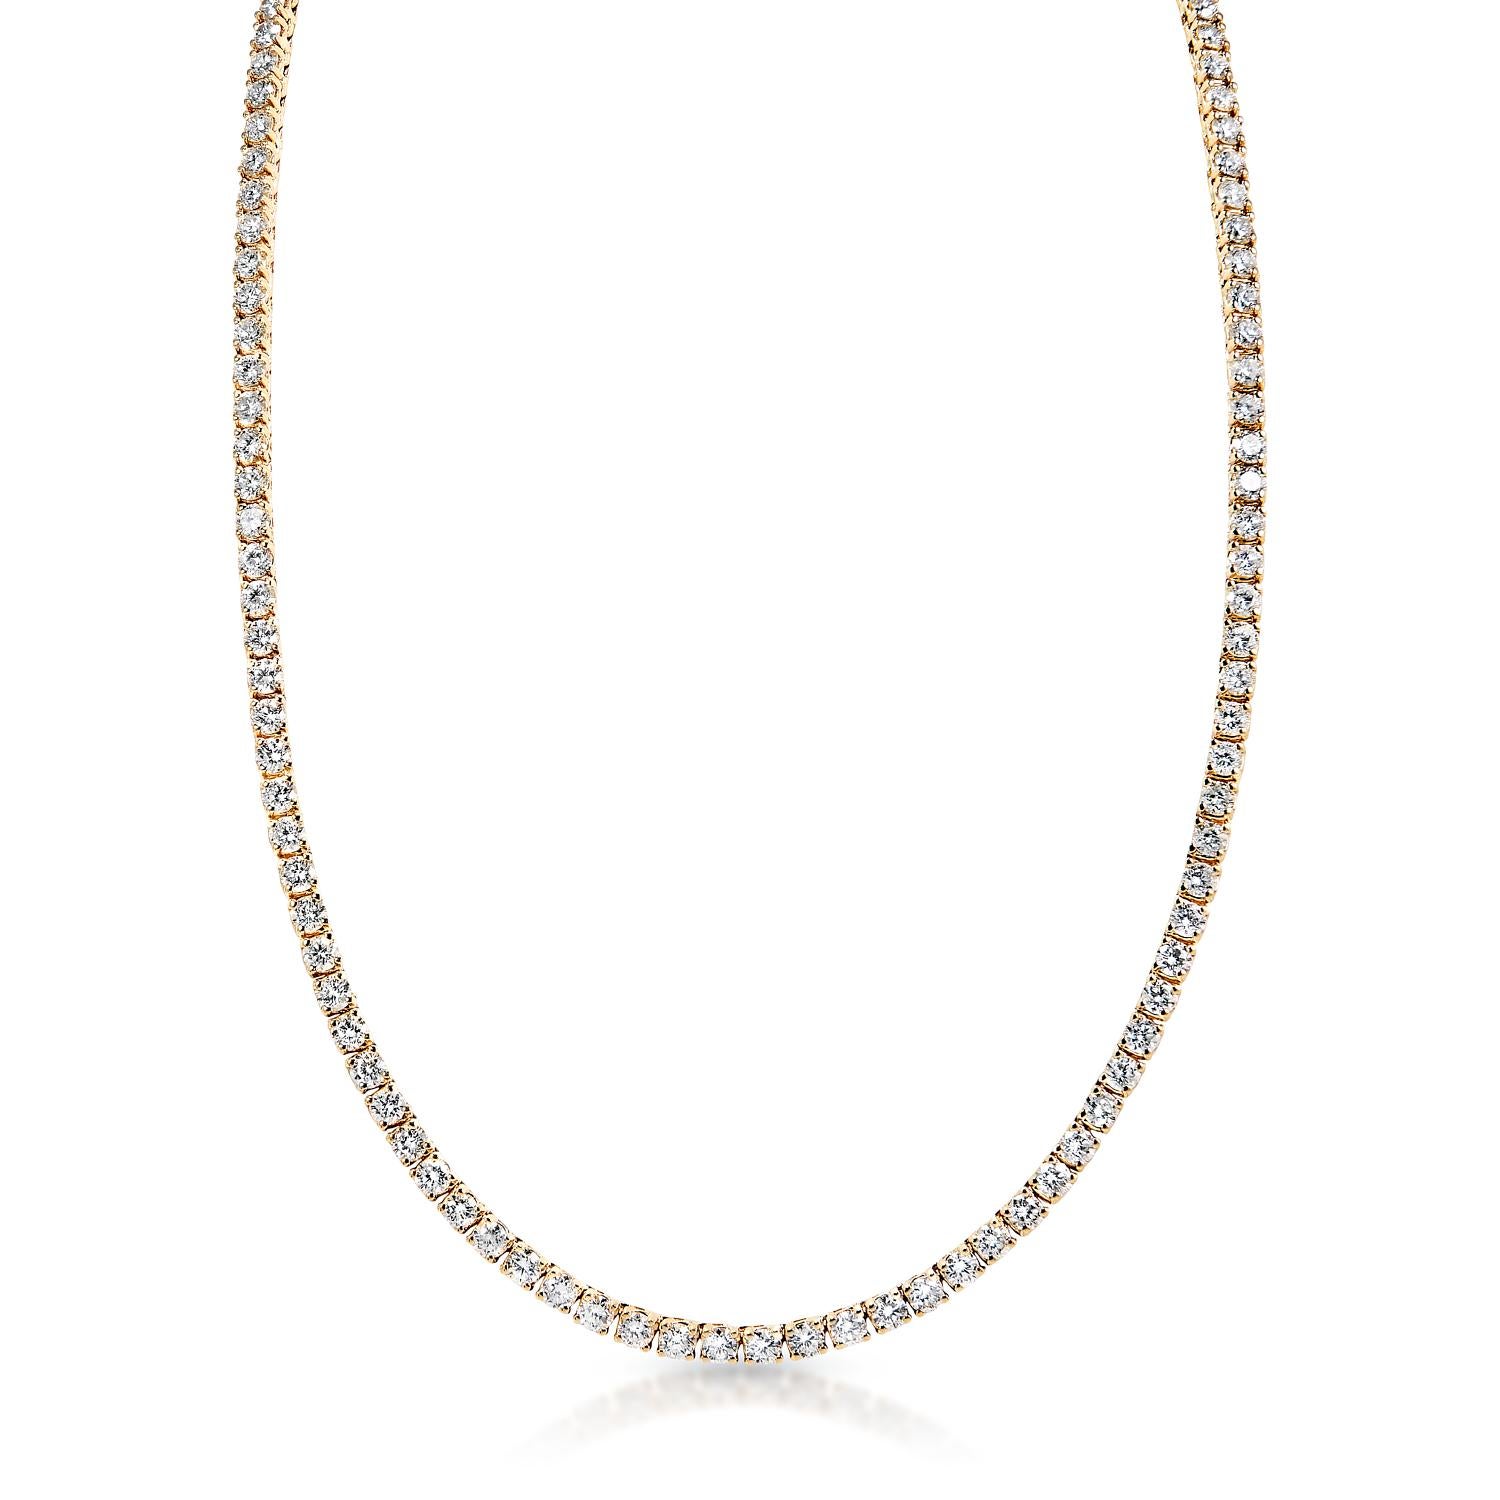 Diamond Tennis Necklace for Male:

Carat Weight: 18.83 Carats
Style: Round Brilliant Cut
Chains: 14 Karat Yellow Gold 30.00 grams